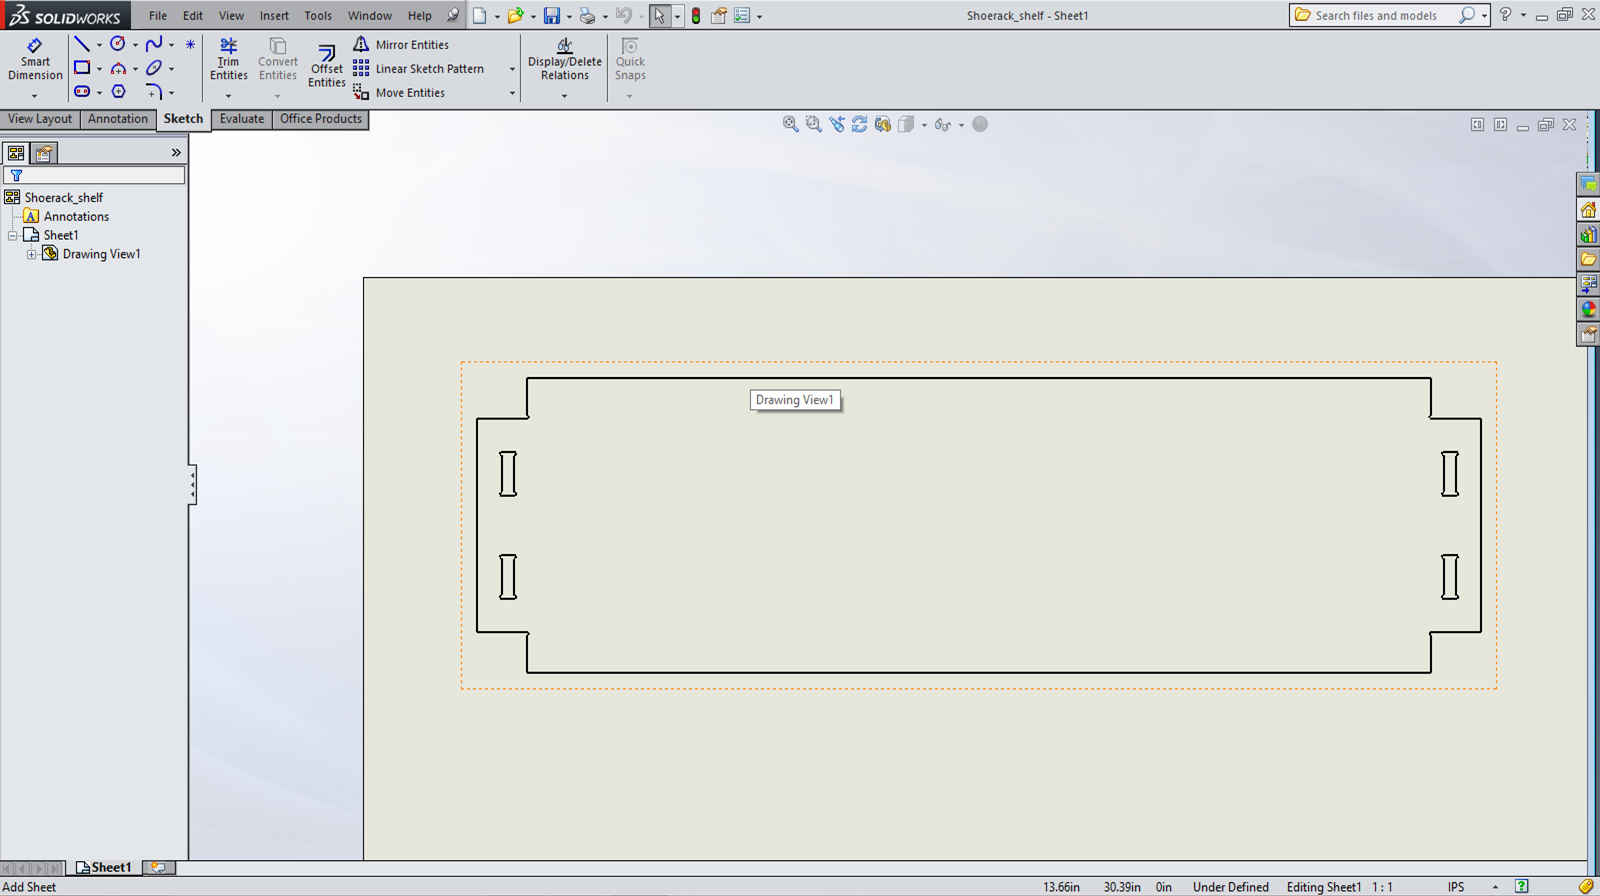 Solidworks drawing of a shoerack shelf